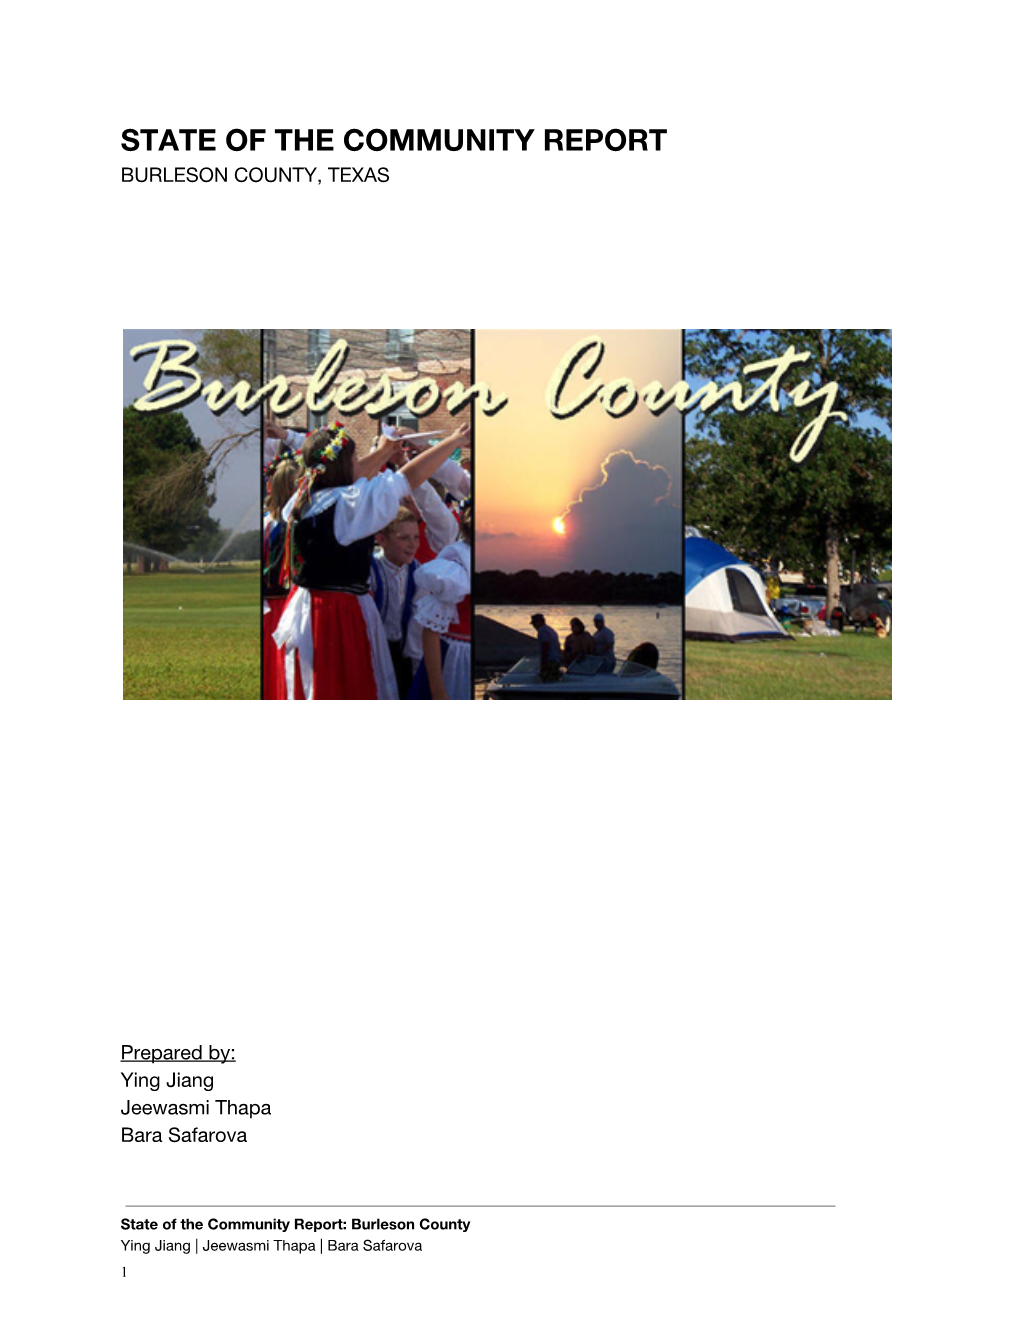 Burleson County State of the Community Report